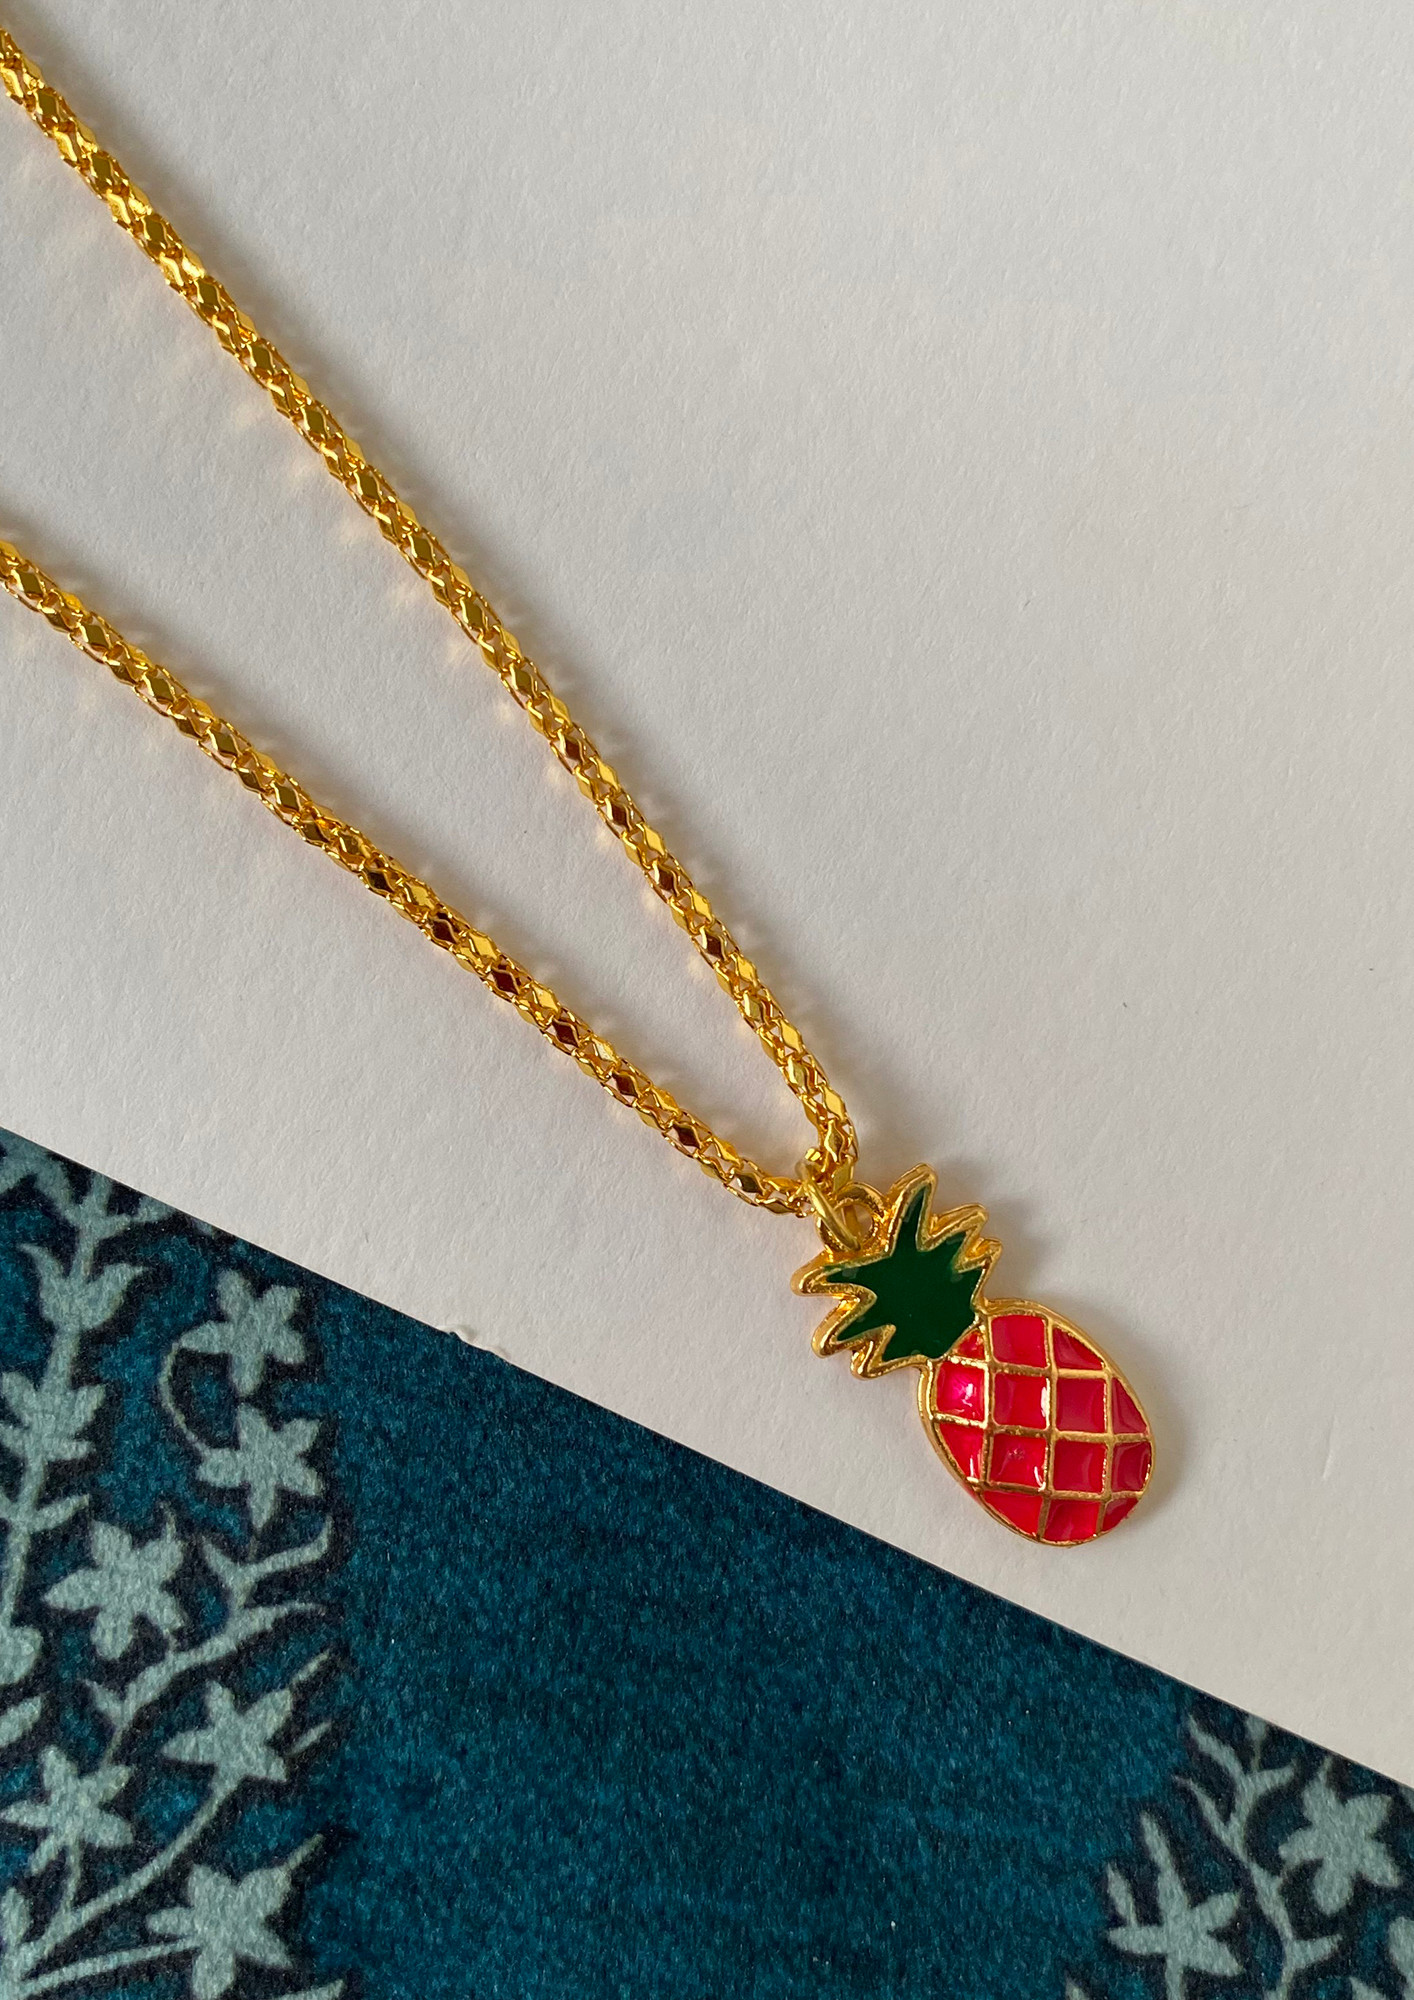 DAINTY PINEAPPLE CHARM NECKLACE